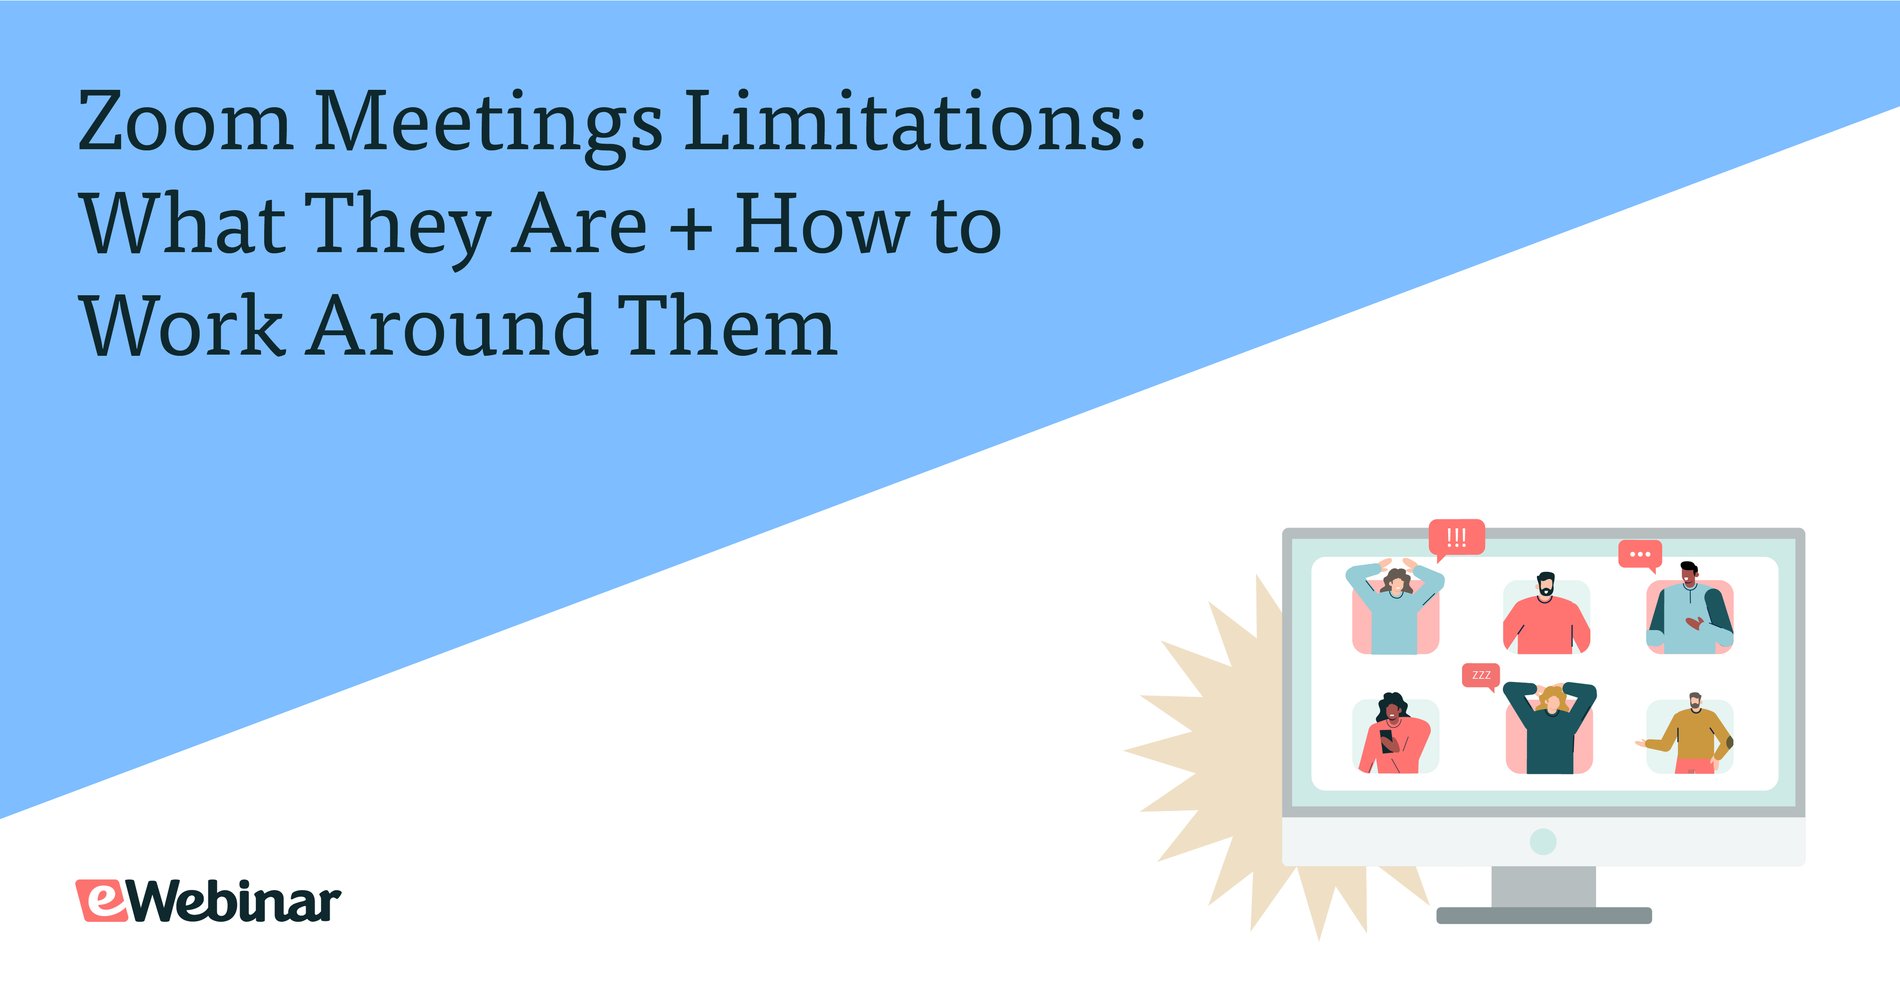 Zoom Meetings Limitations: What They Are + How to Work Around Them